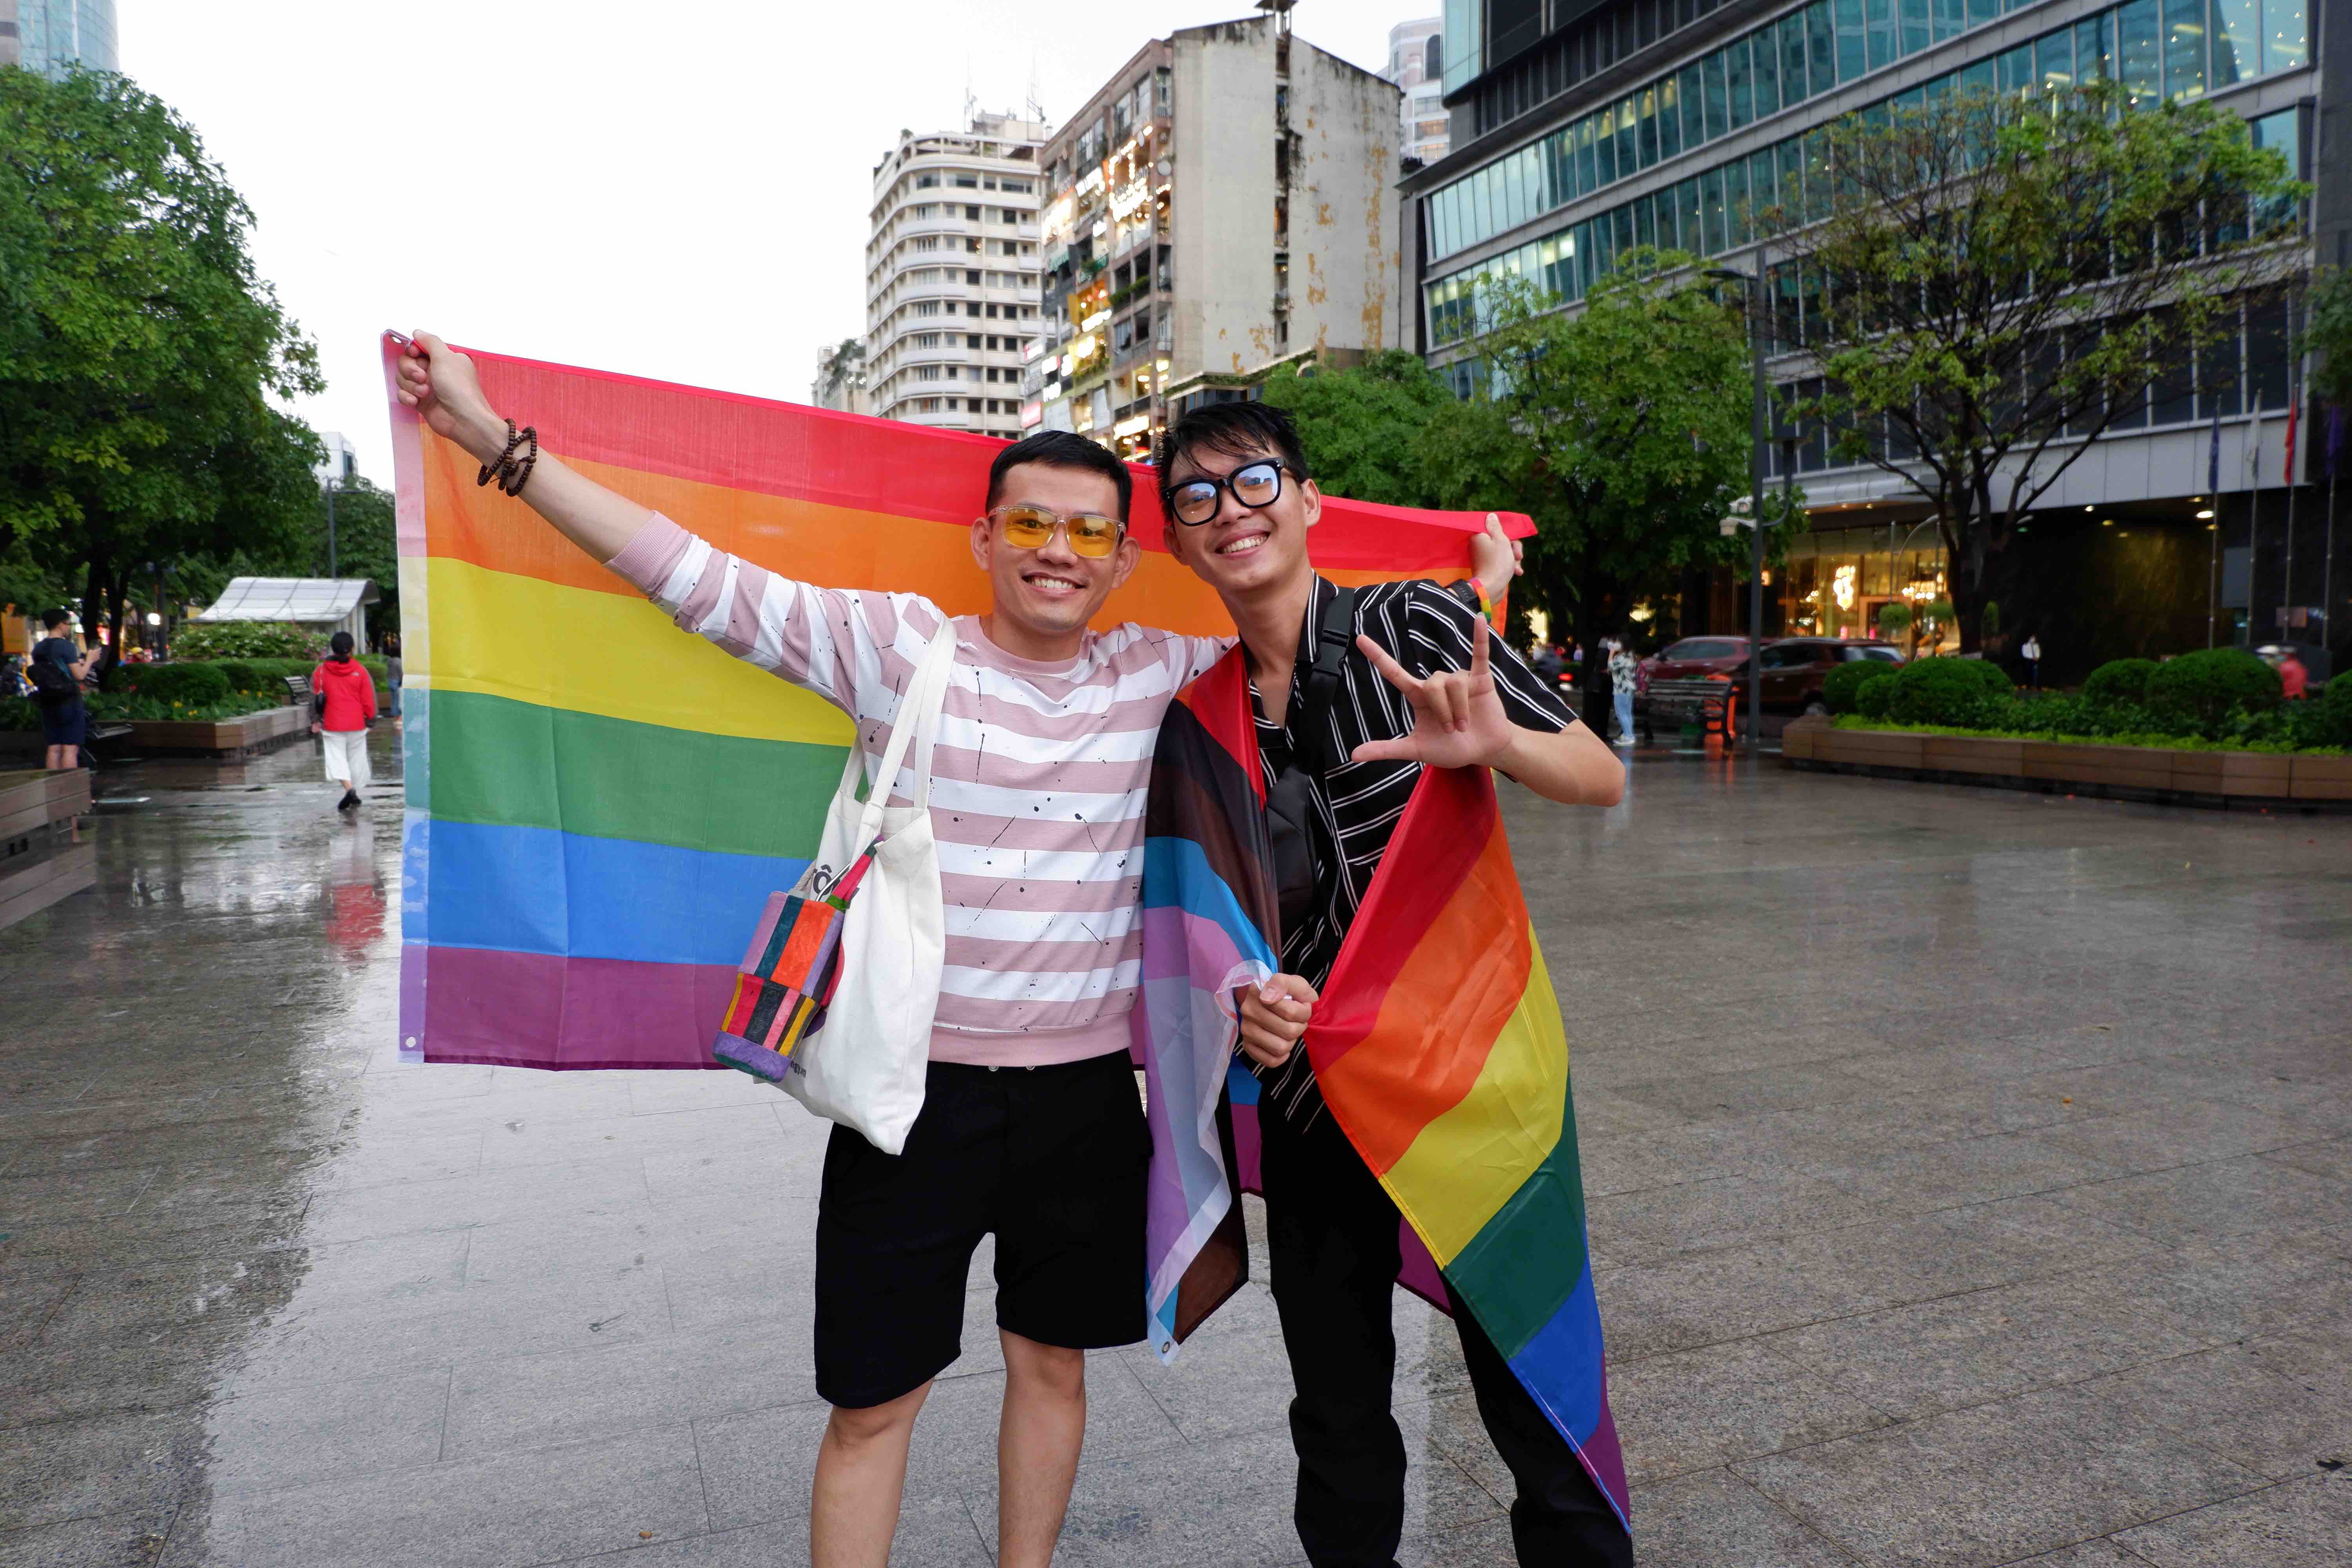 Participants hold flags to show support for freedom and equality LGBT community during the VietPride parade in Ho Chi Minh City on October 1, 2022. Photo: Linh To / Tuoi Tre News